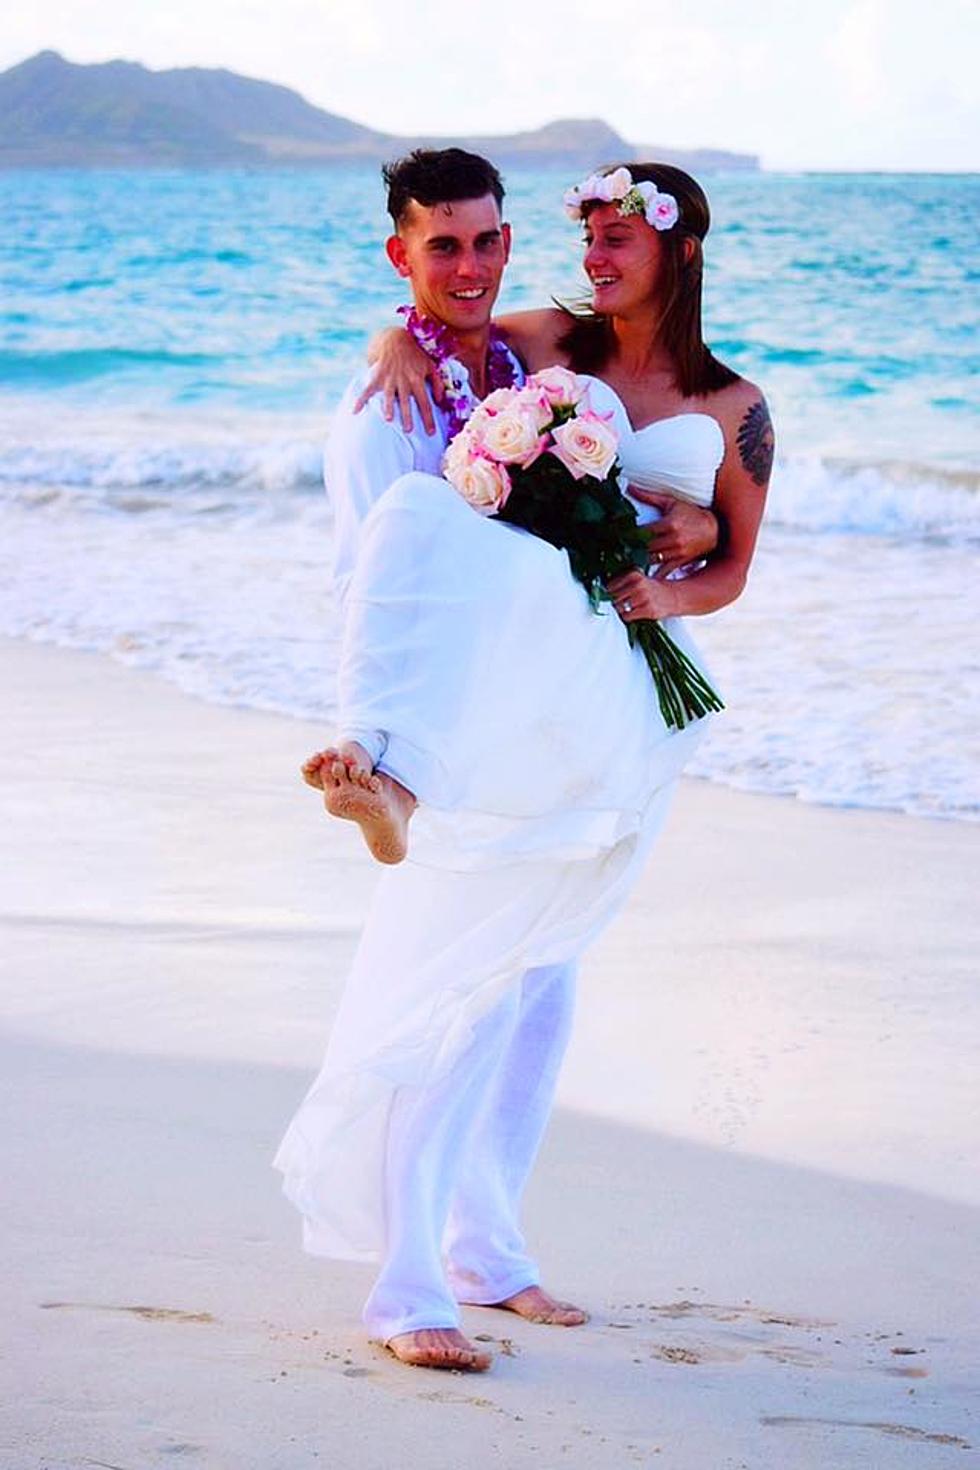 My Son Ties the Knot with His Best Friend in Gorgeous Hawaiian Wedding [VIDEO]